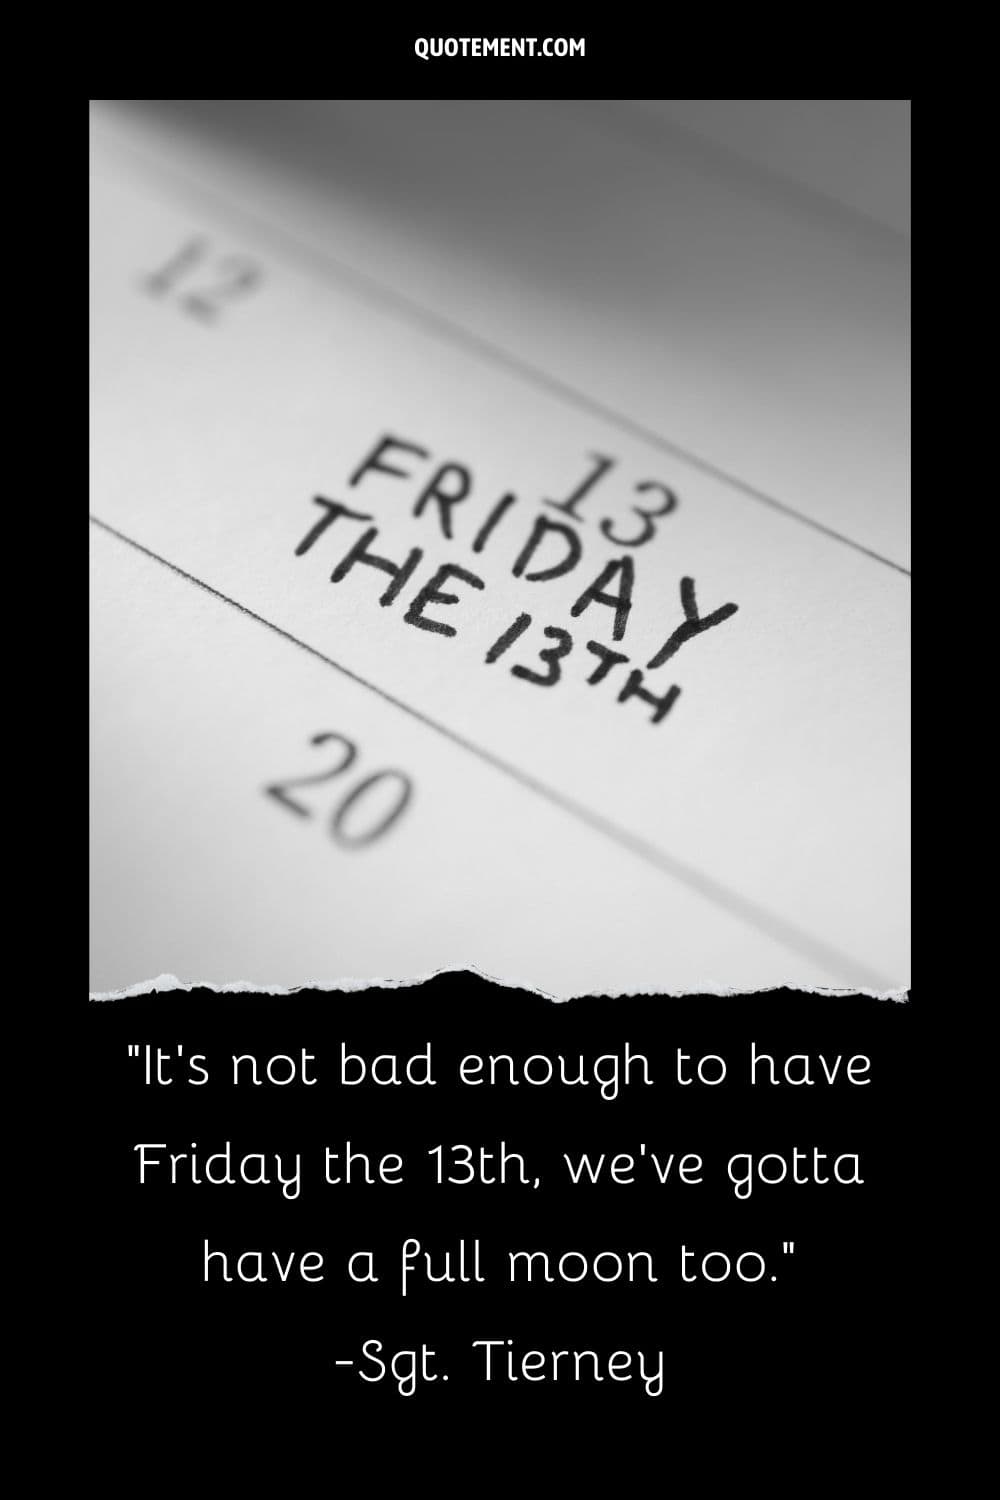 Unlucky Friday the 13th on calendar representing a quote from Friday The 13th.